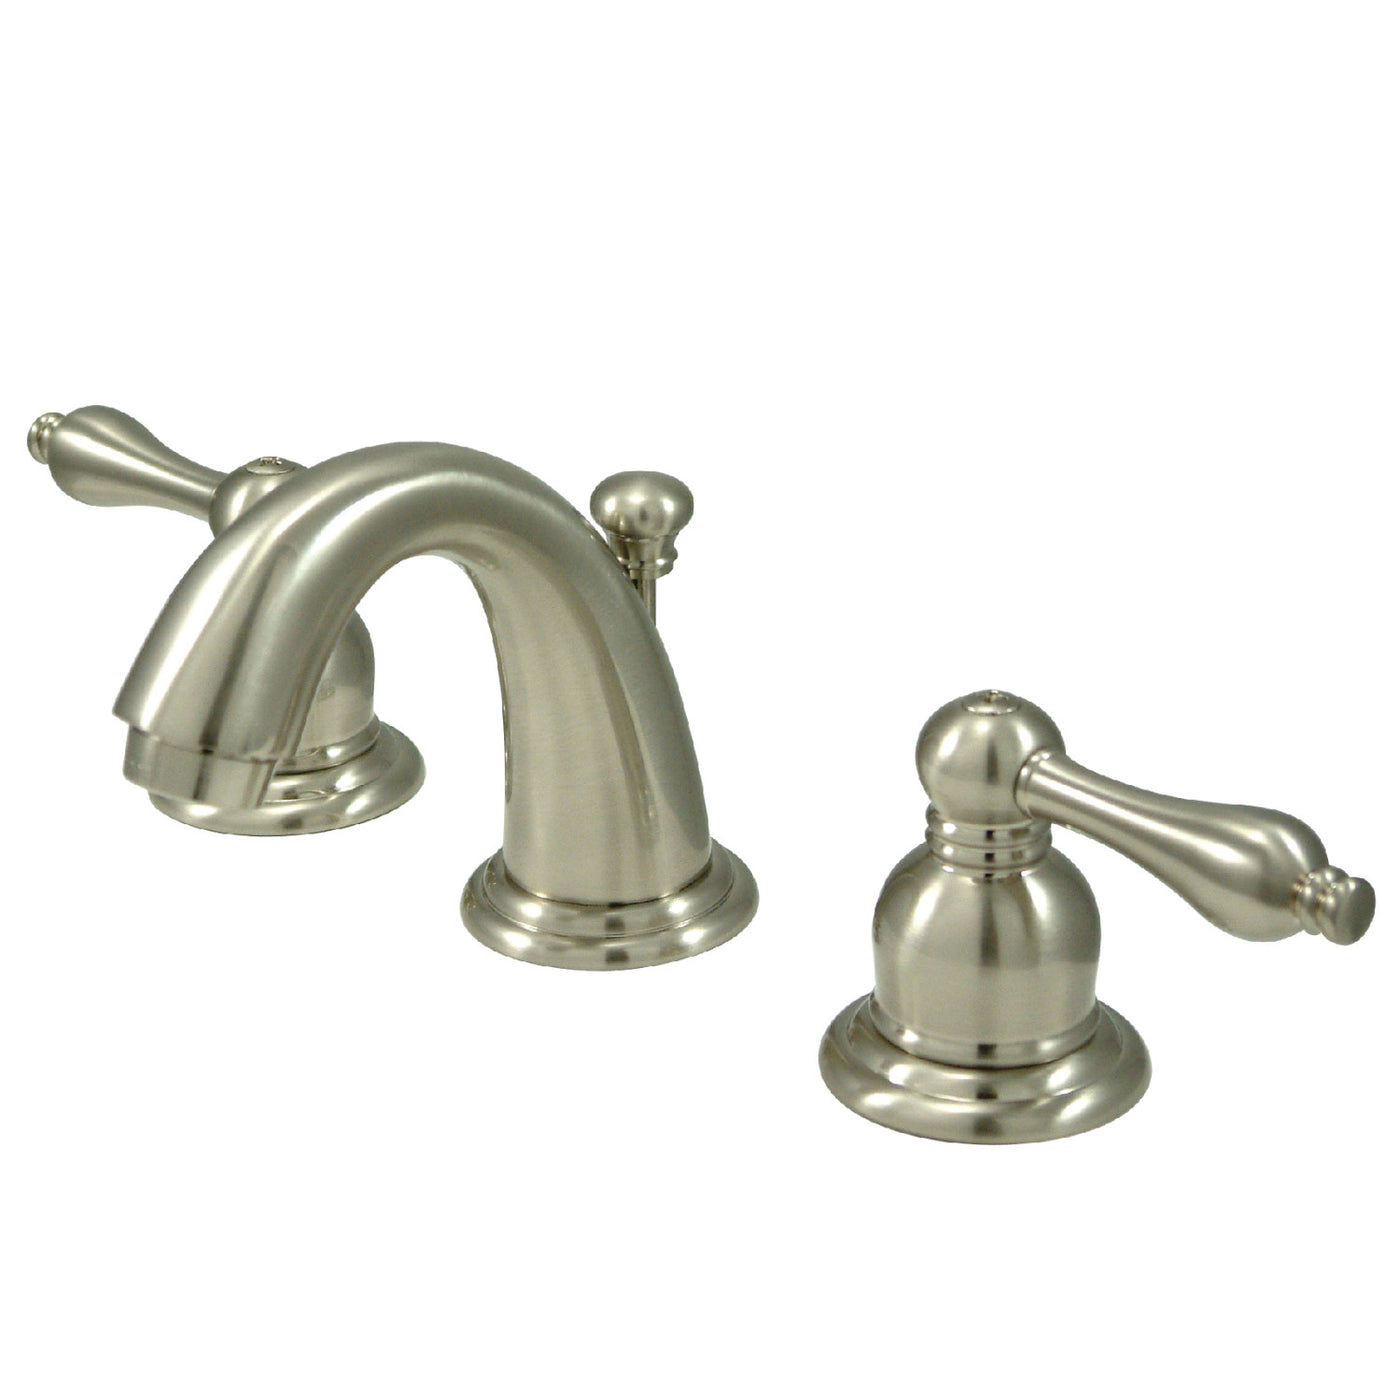 Elements of Design EB918AL Widespread Bathroom Faucet with Retail Pop-Up, Brushed Nickel